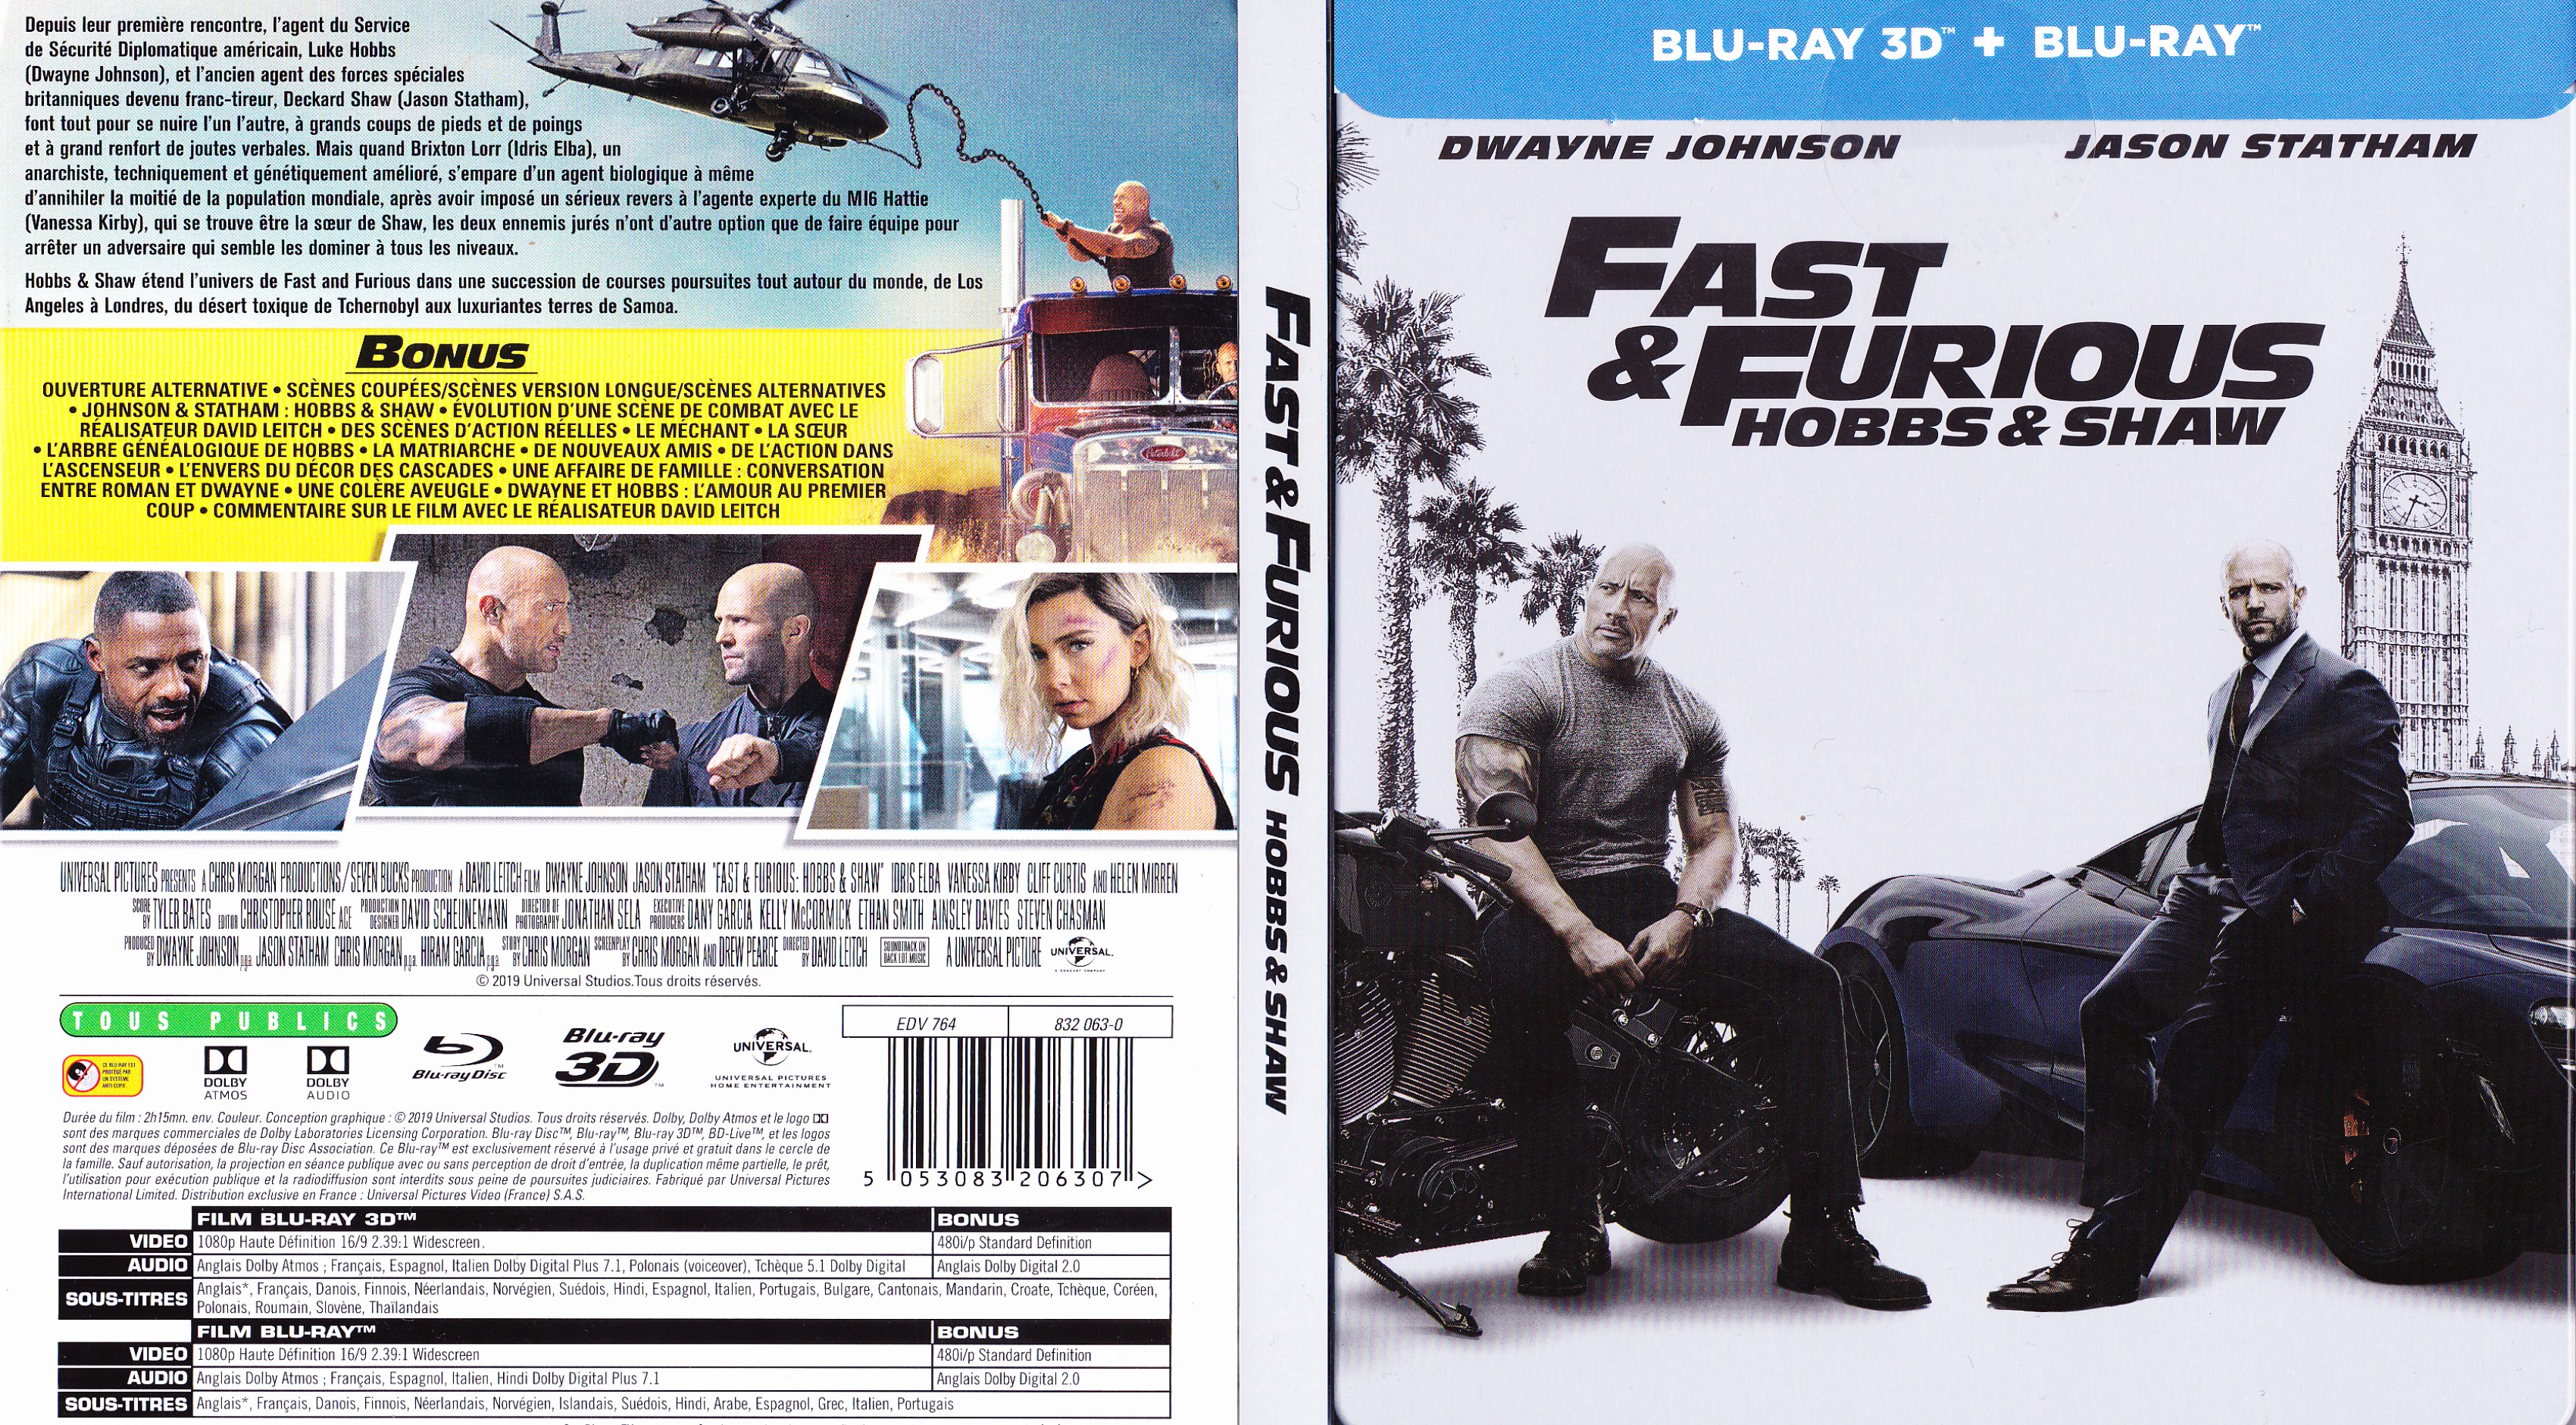 Jaquette DVD Fast & Furious Hobbs & Shaw 3D (BLU-RAY)